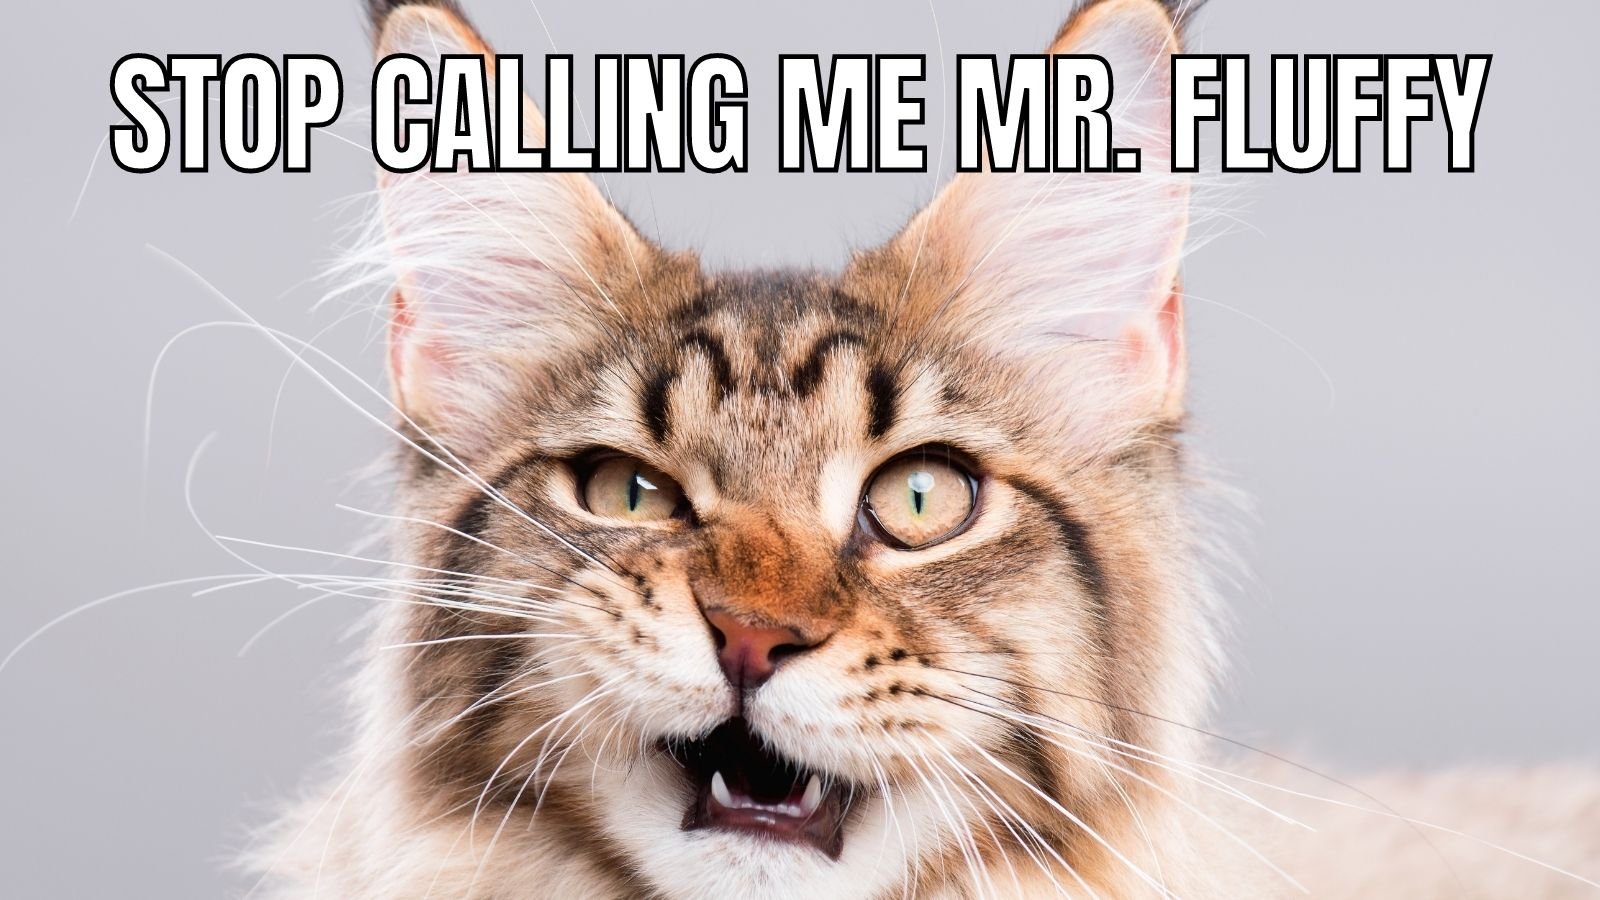 25 Funny Cat Memes to Brighten Your Day | Flipboard